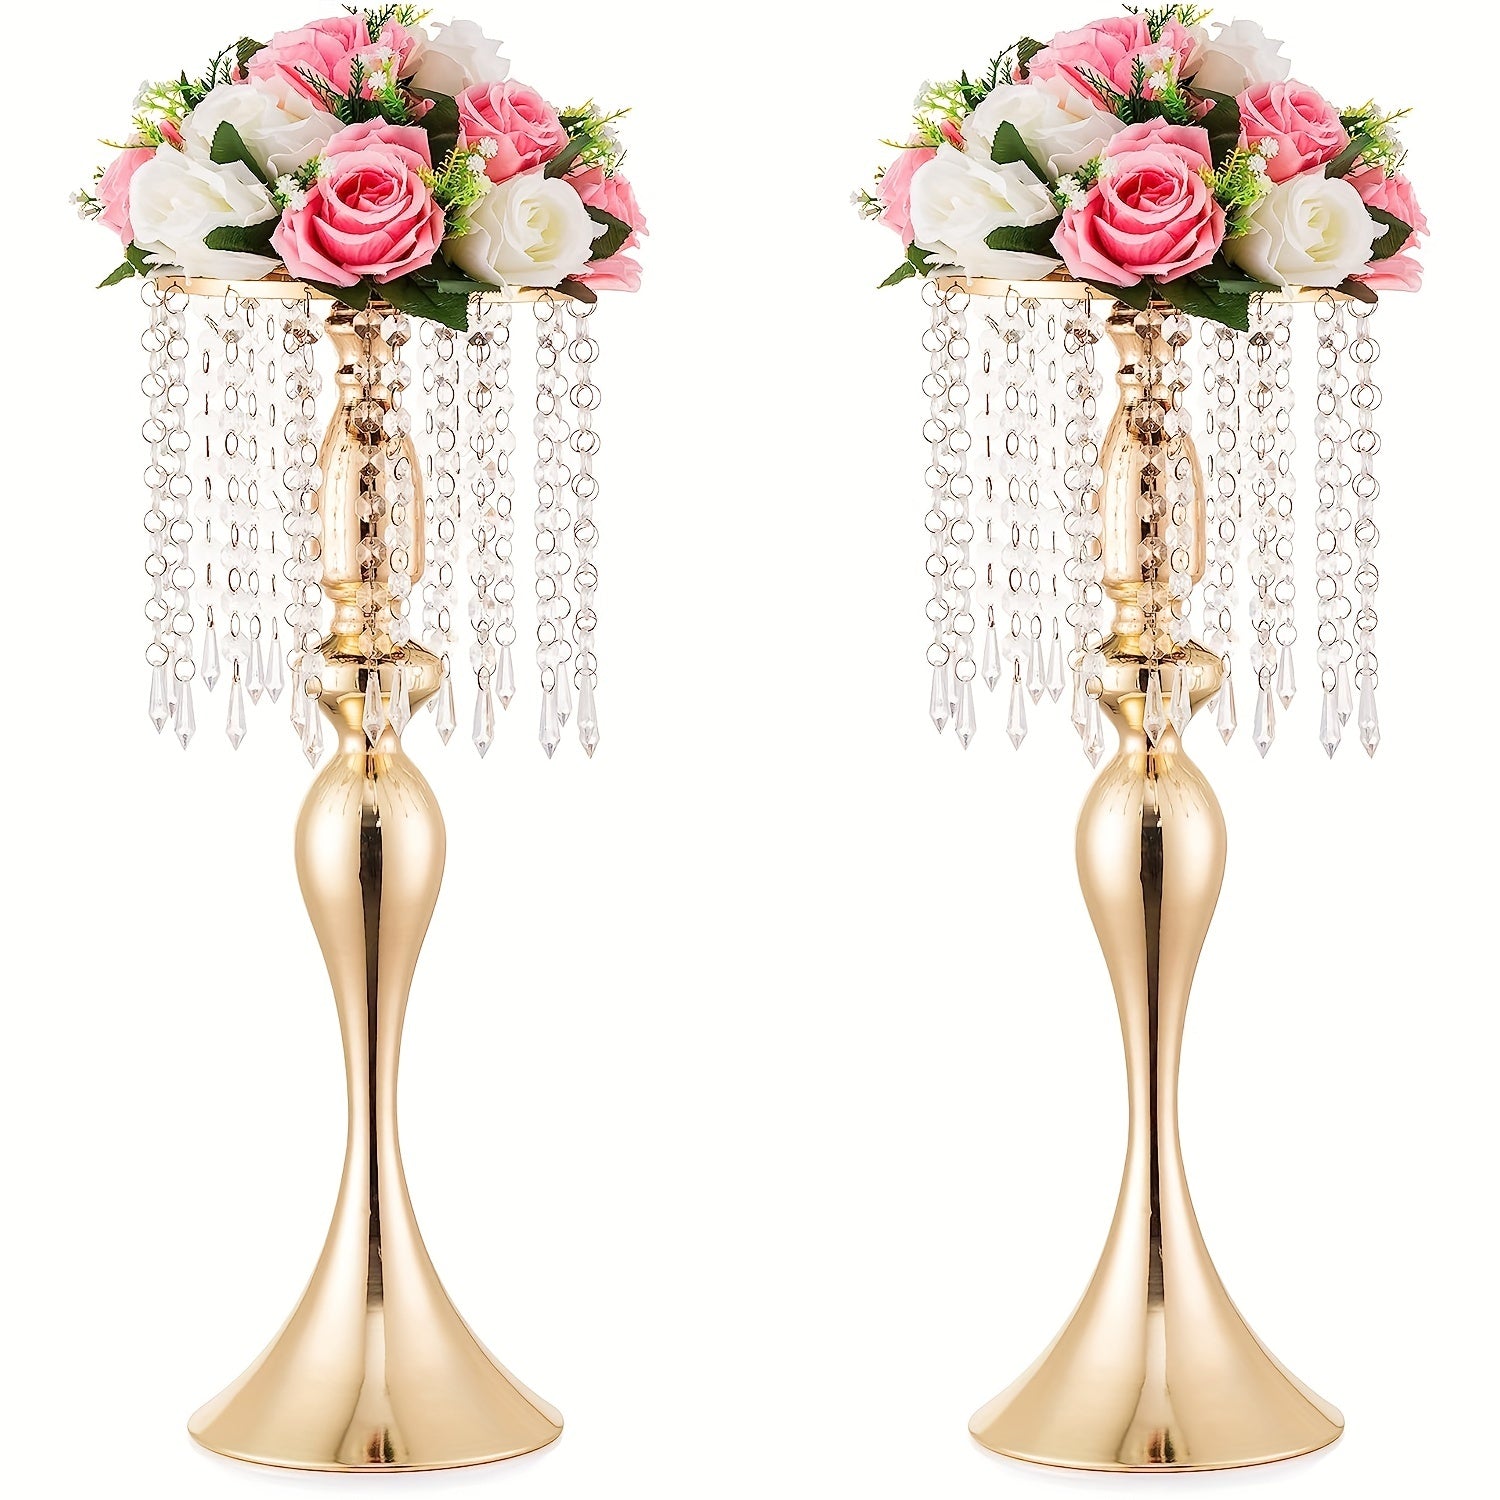 2pcs, Golden/Slivery Vases For Centerpieces, 21.3in Crystal Flower Arrangement Stand, Wedding Centerpieces For Tables, Tall Metal Flower Vase Holders For Wedding, Event, Reception, Birthday Home Decor